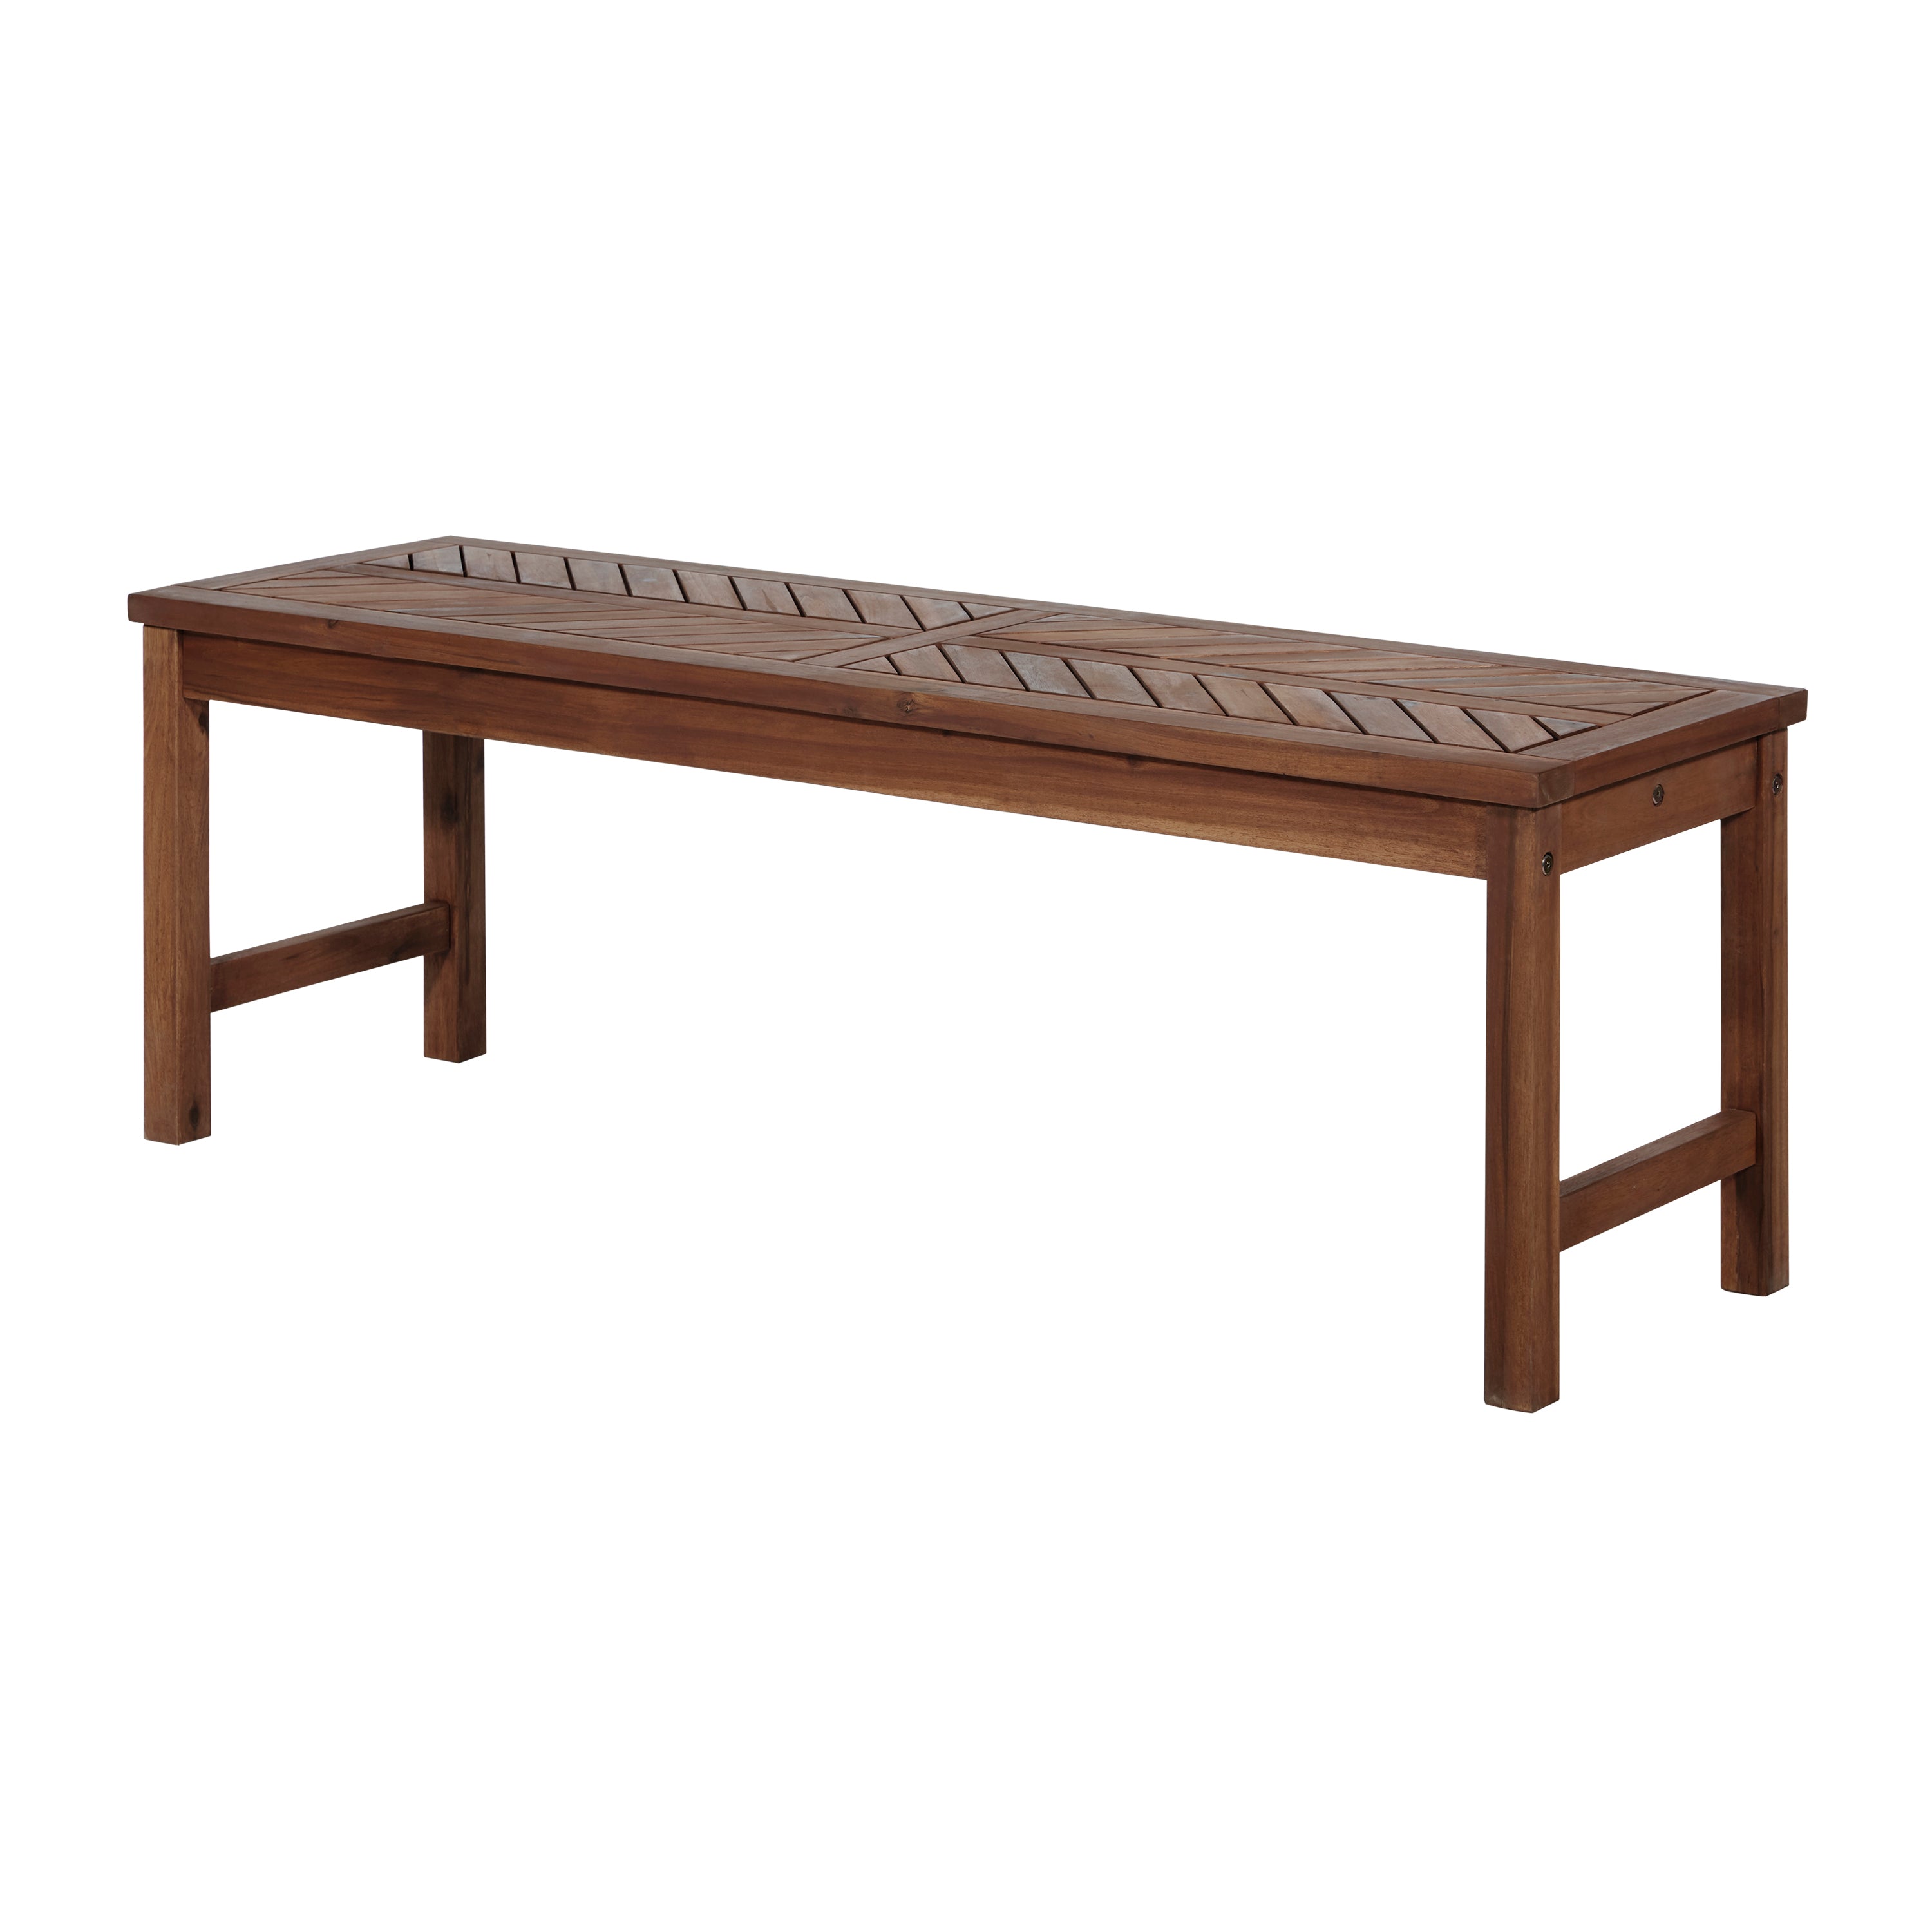 Vincent 53" Acacia Wood Chevron Dining Bench - East Shore Modern Home Furnishings